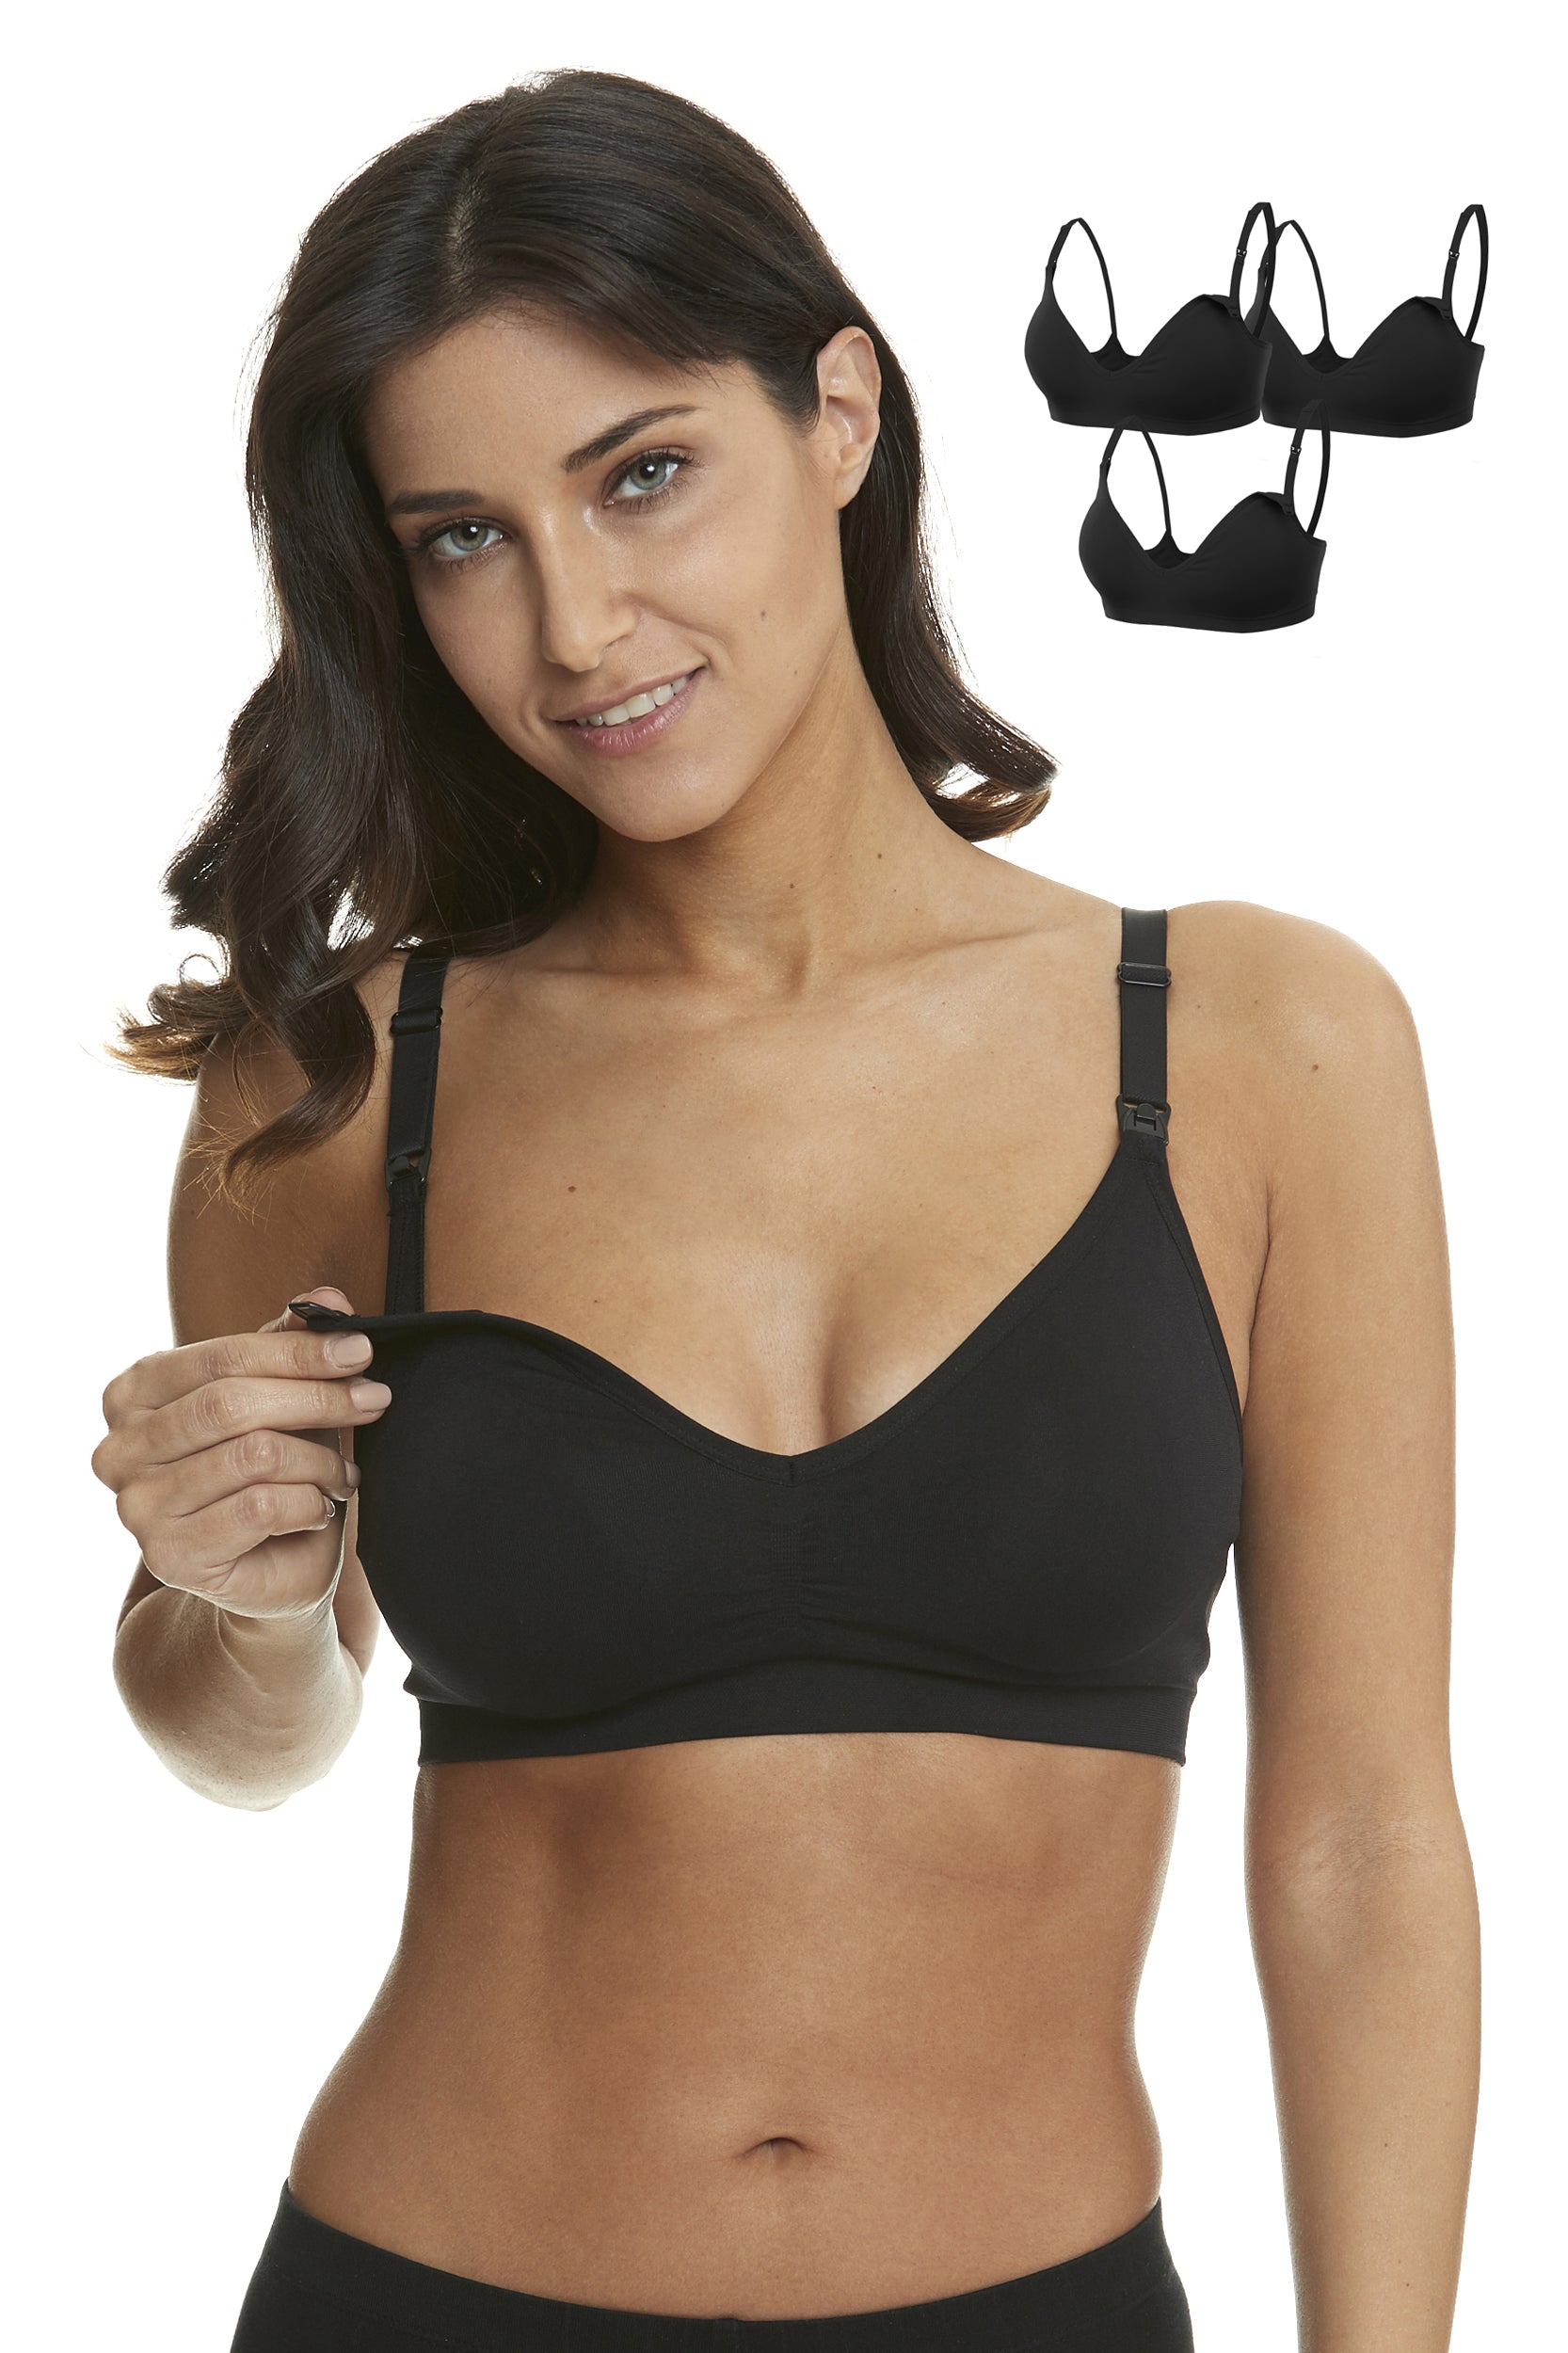  Seamless Triangle Bralettes for Women Deep V-Neck Top